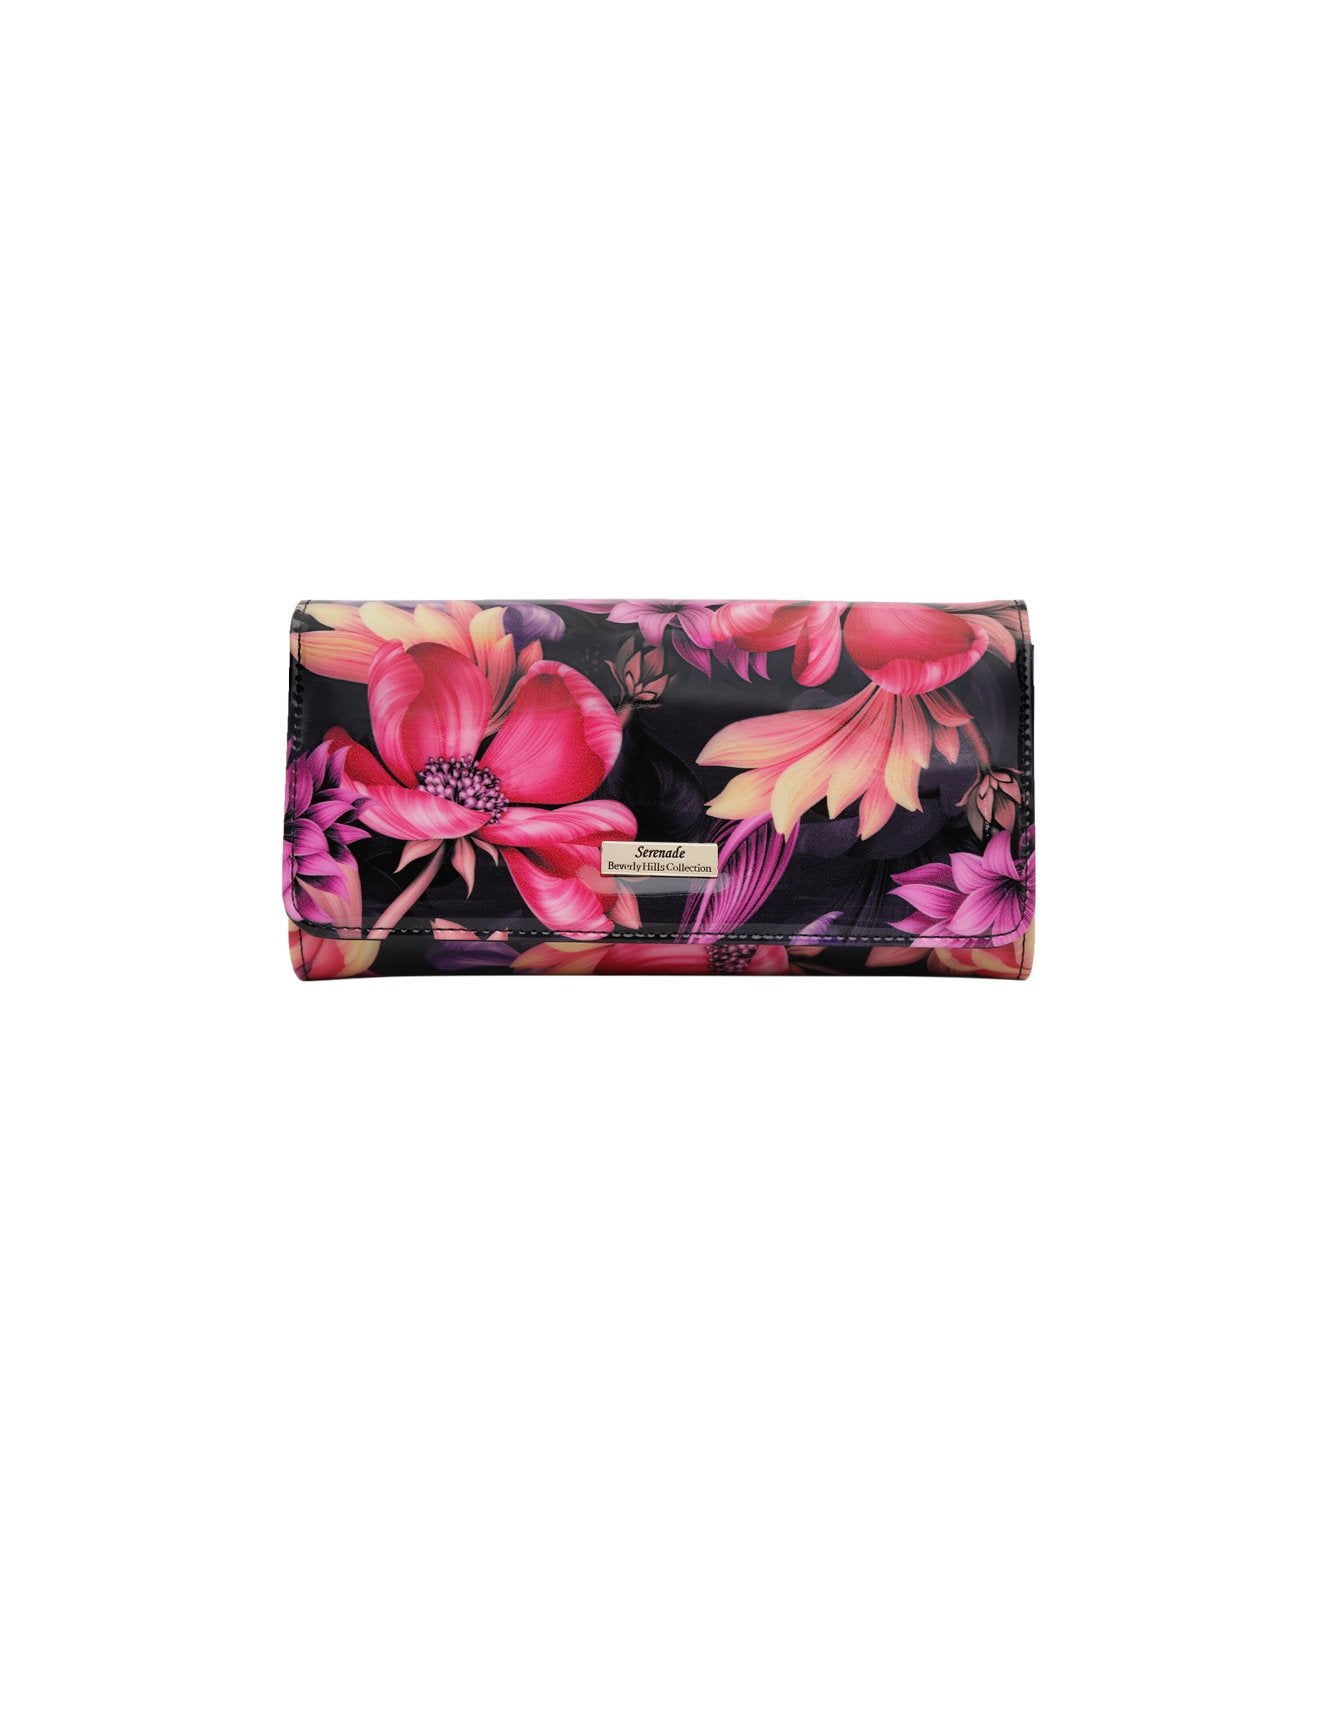 Serenade - Cynthia WSN-2601 RFID Protected Large Leather Wallet - Floral